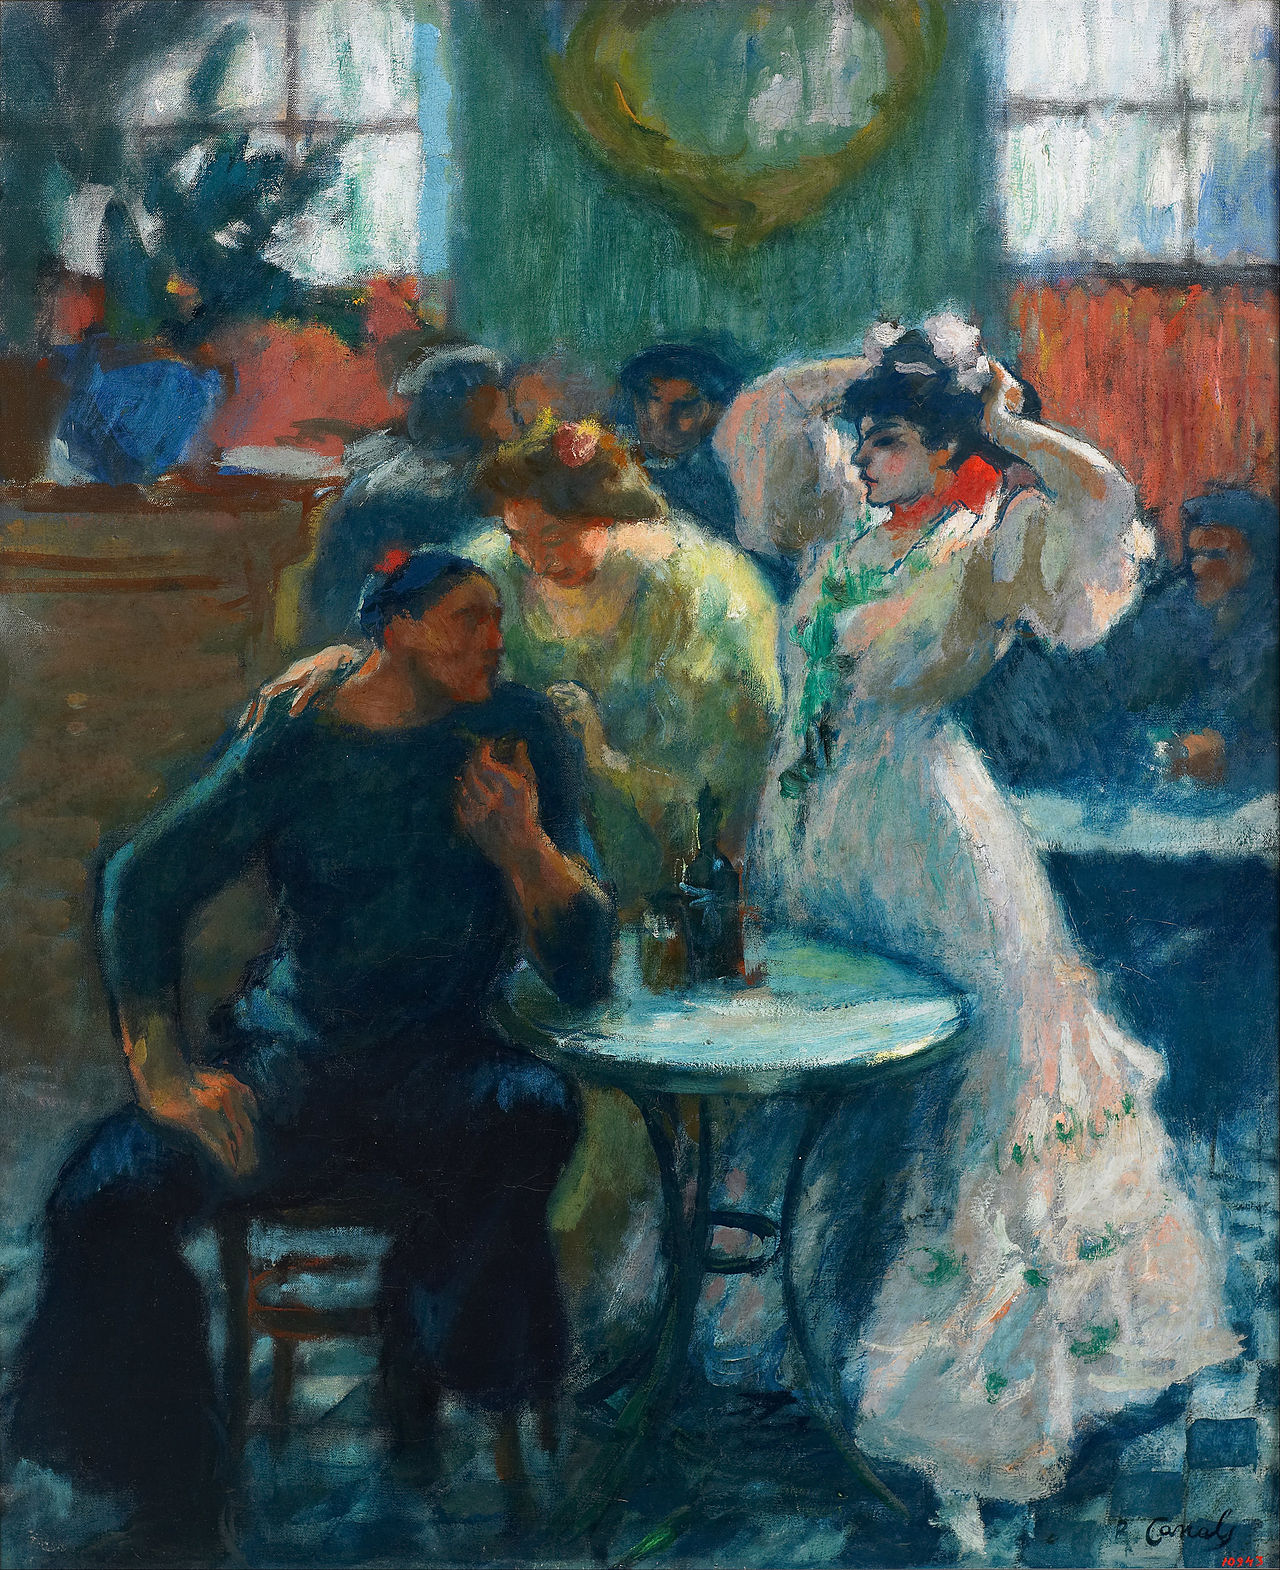 Inspiration: “In The Bar,” by Ricard Canals